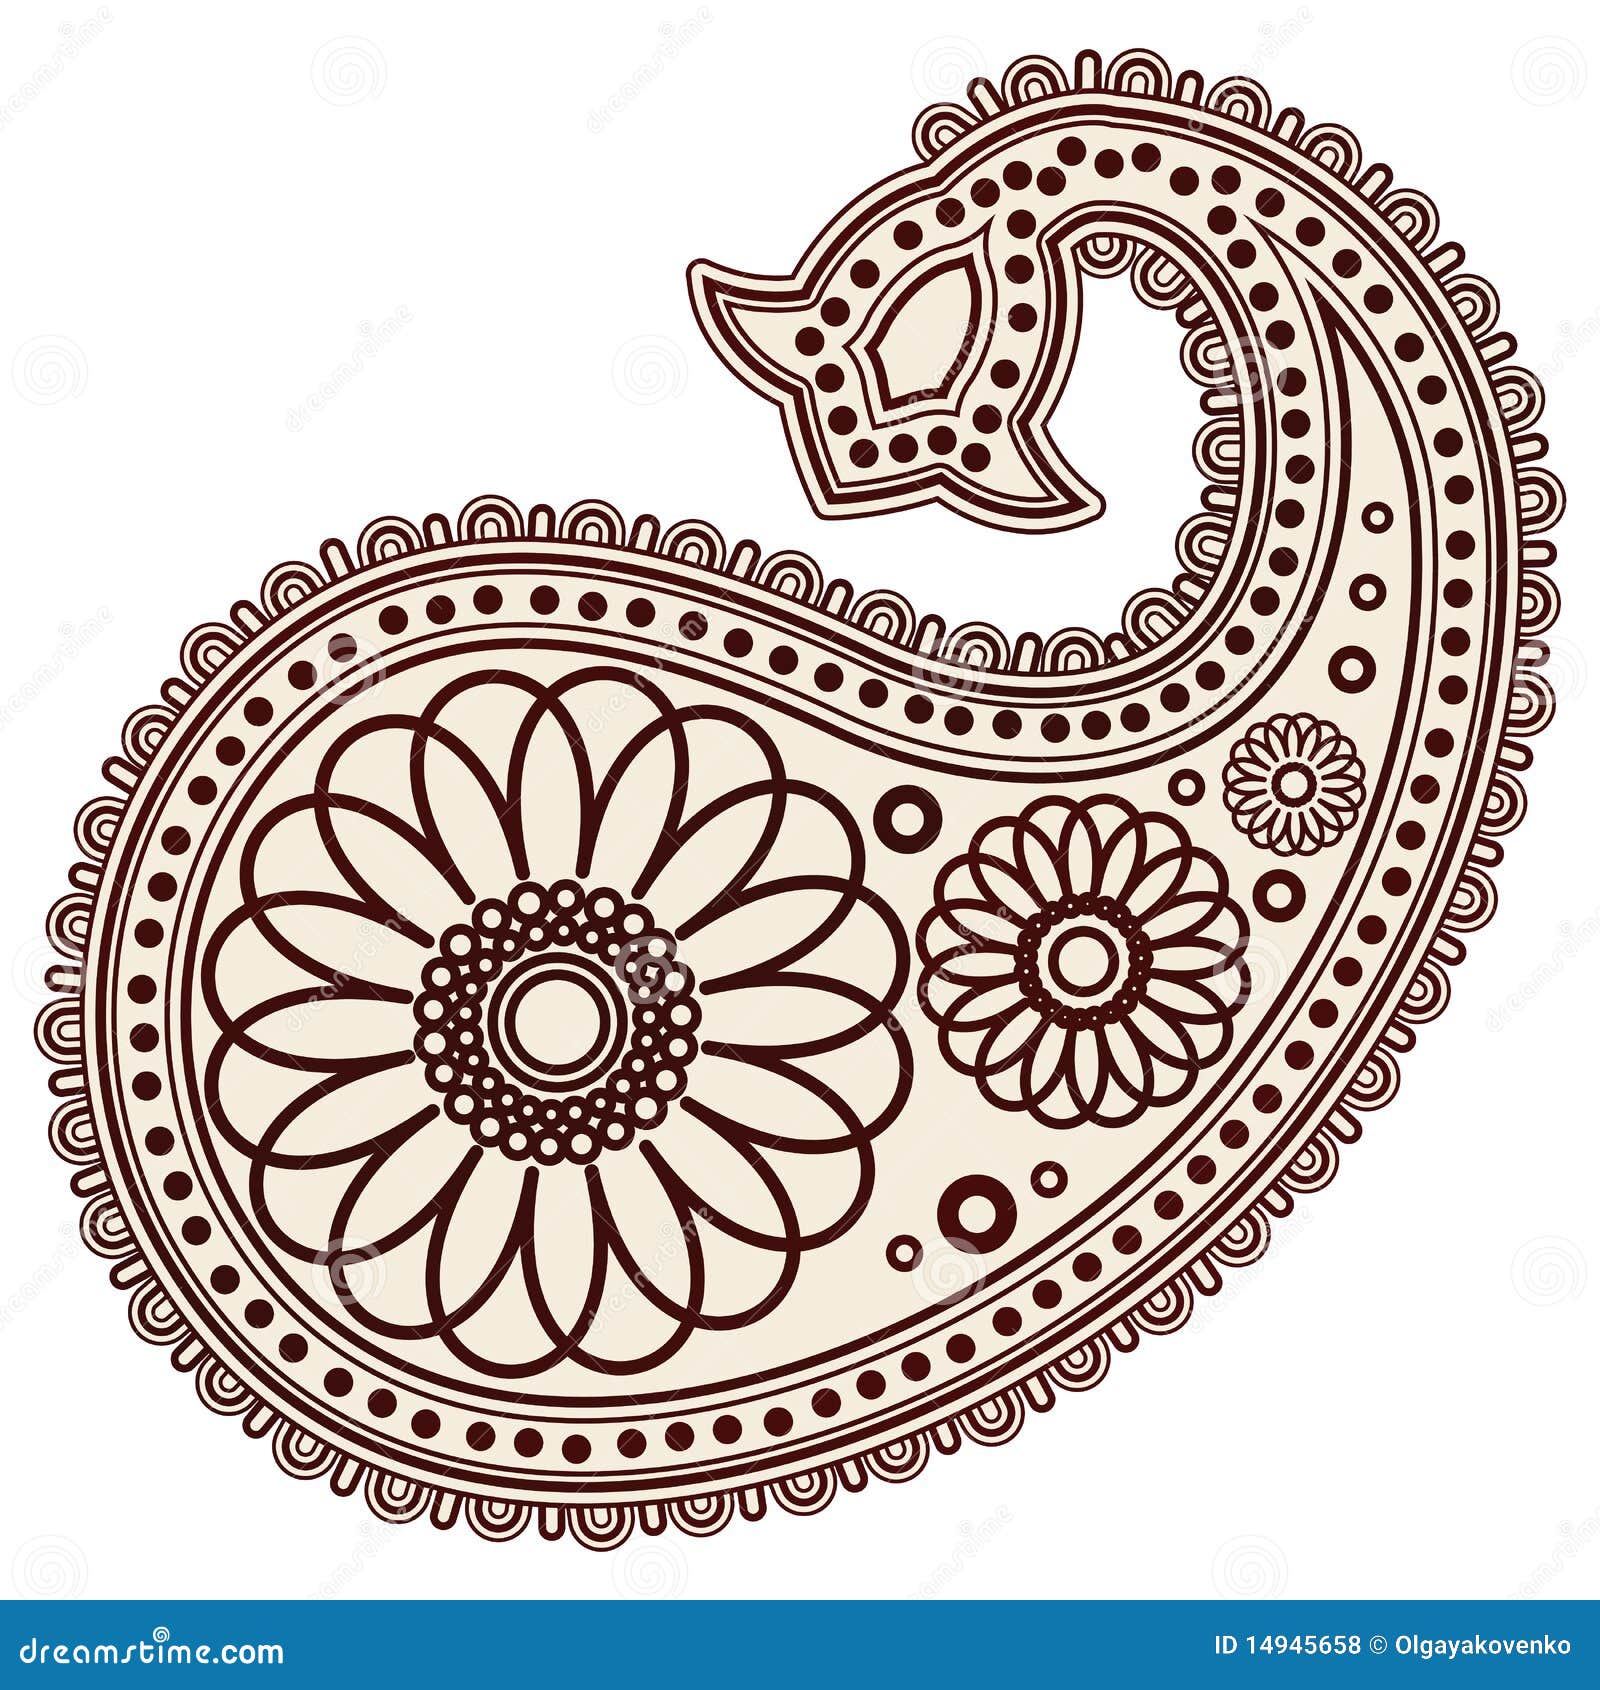 Isolated Indian Designs Royalty Free Stock Photos - Image: 14945658